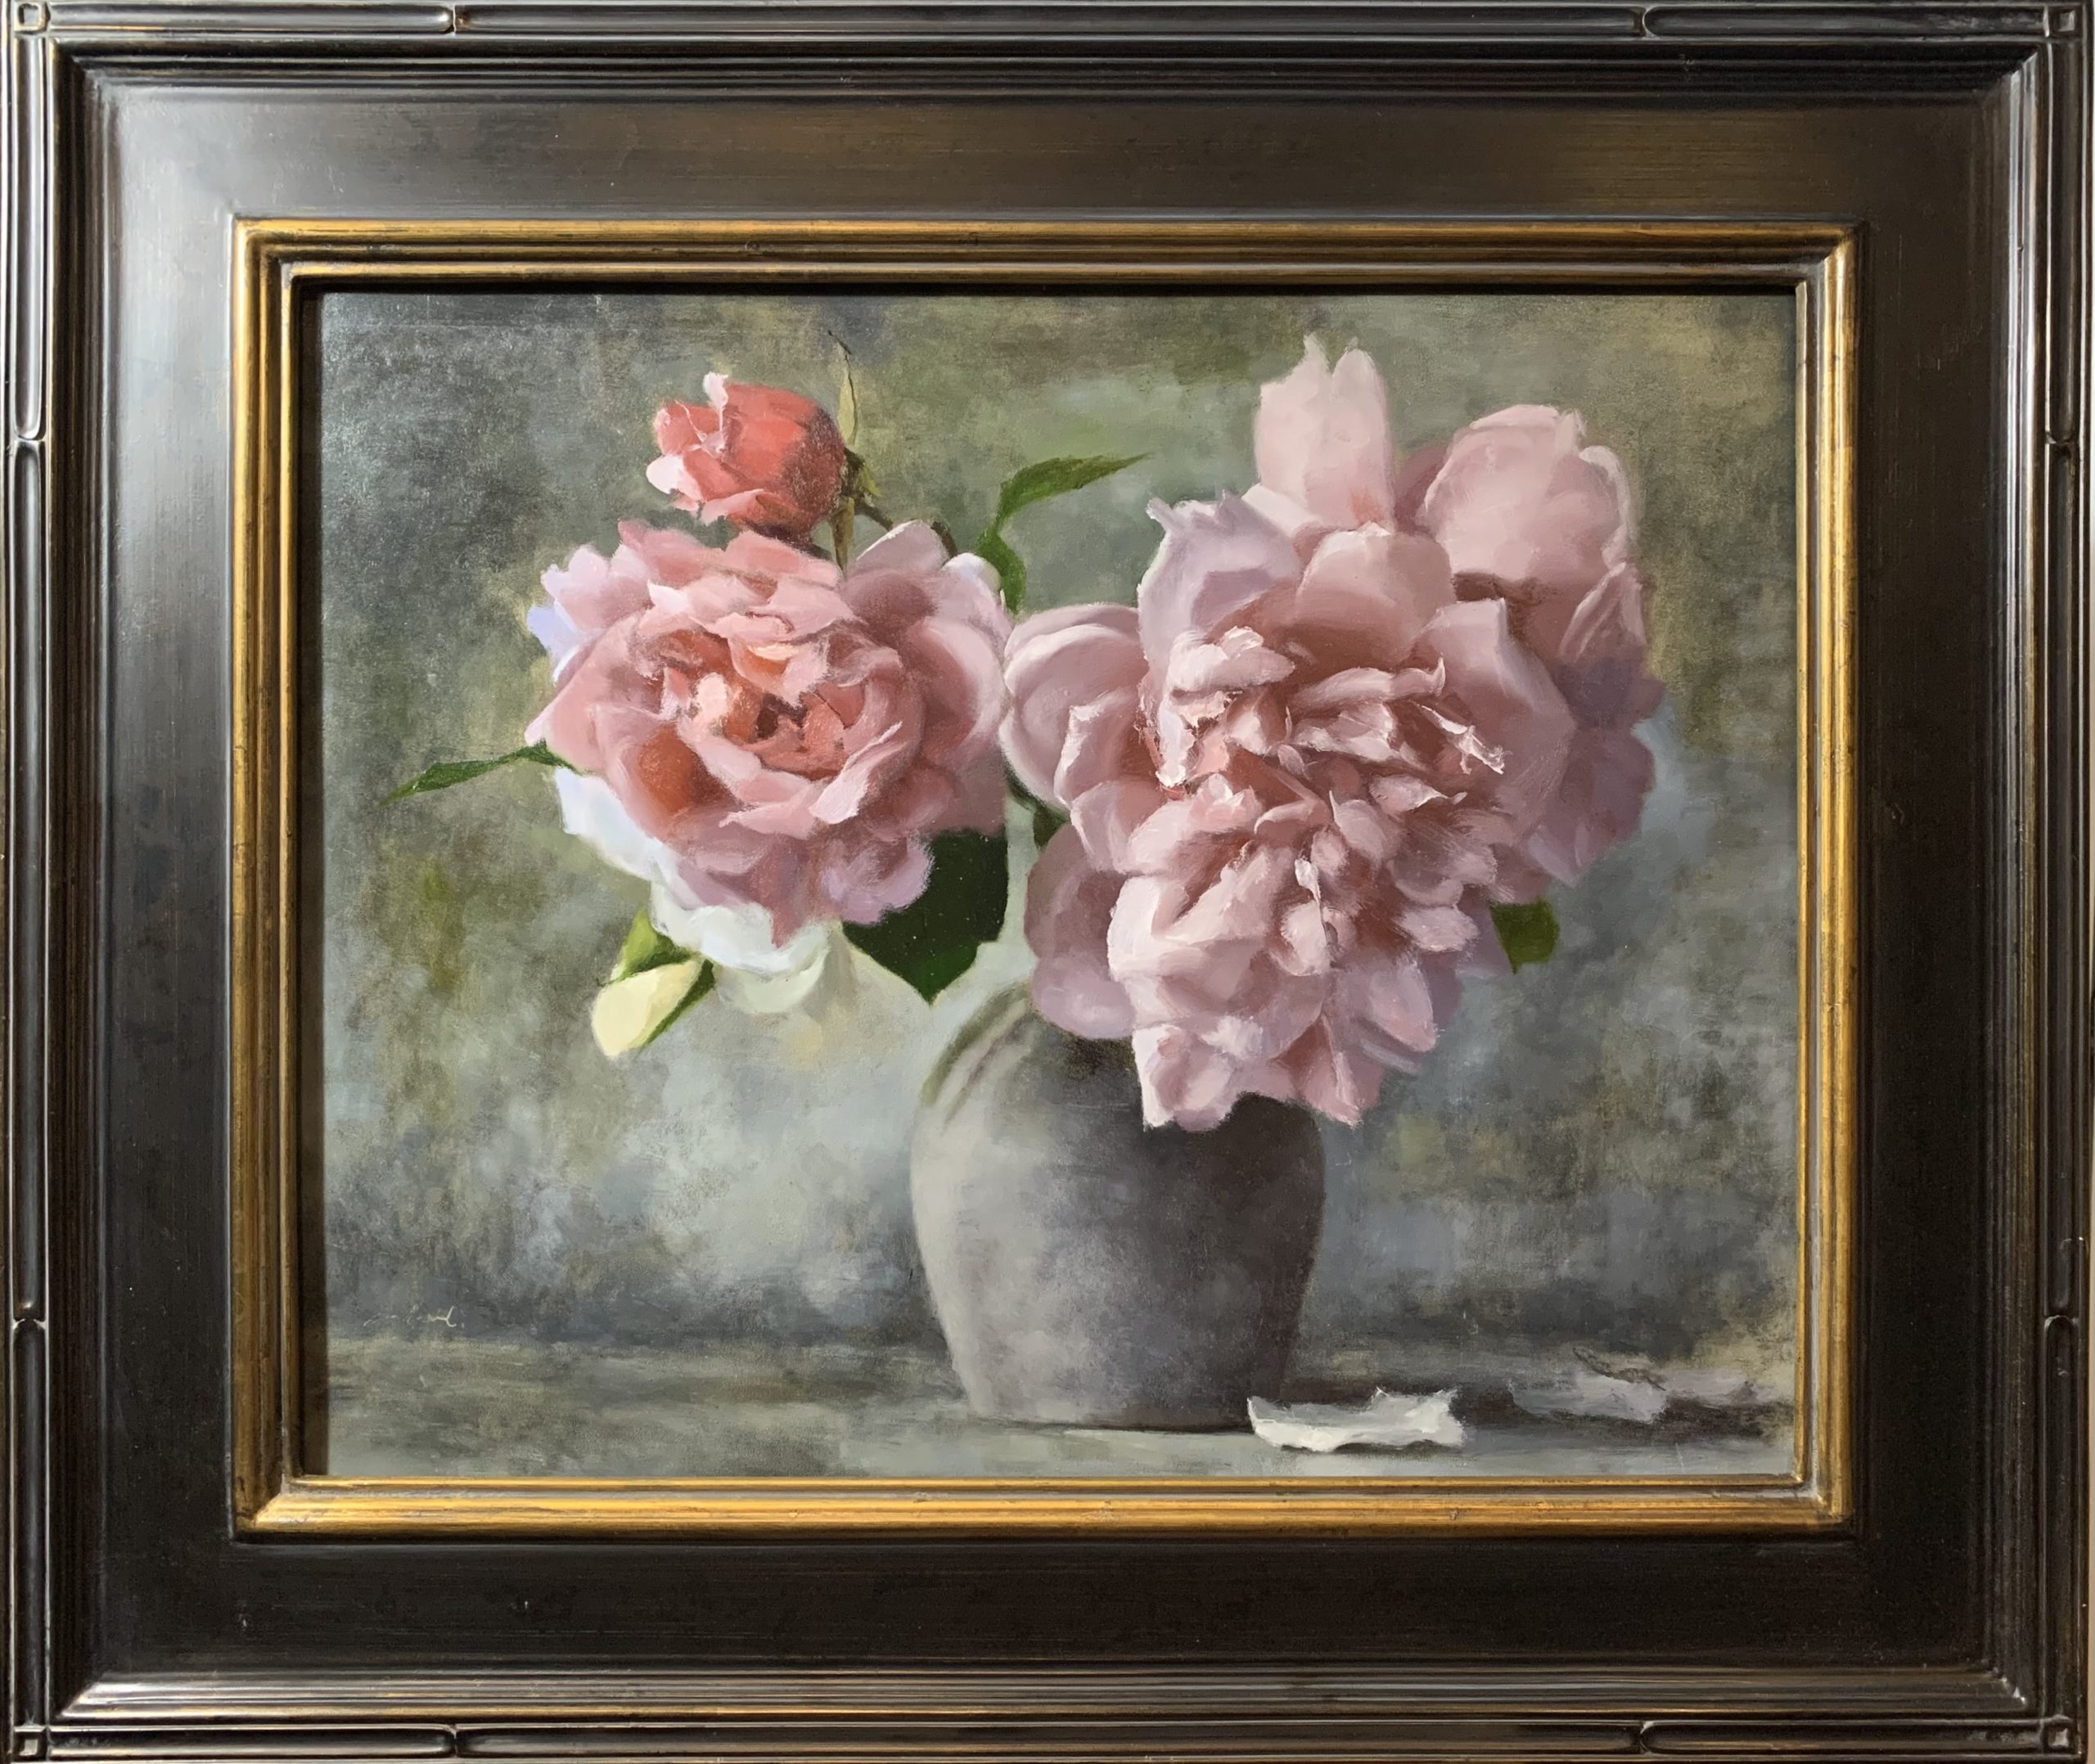 Contemporary realism art - floral painting